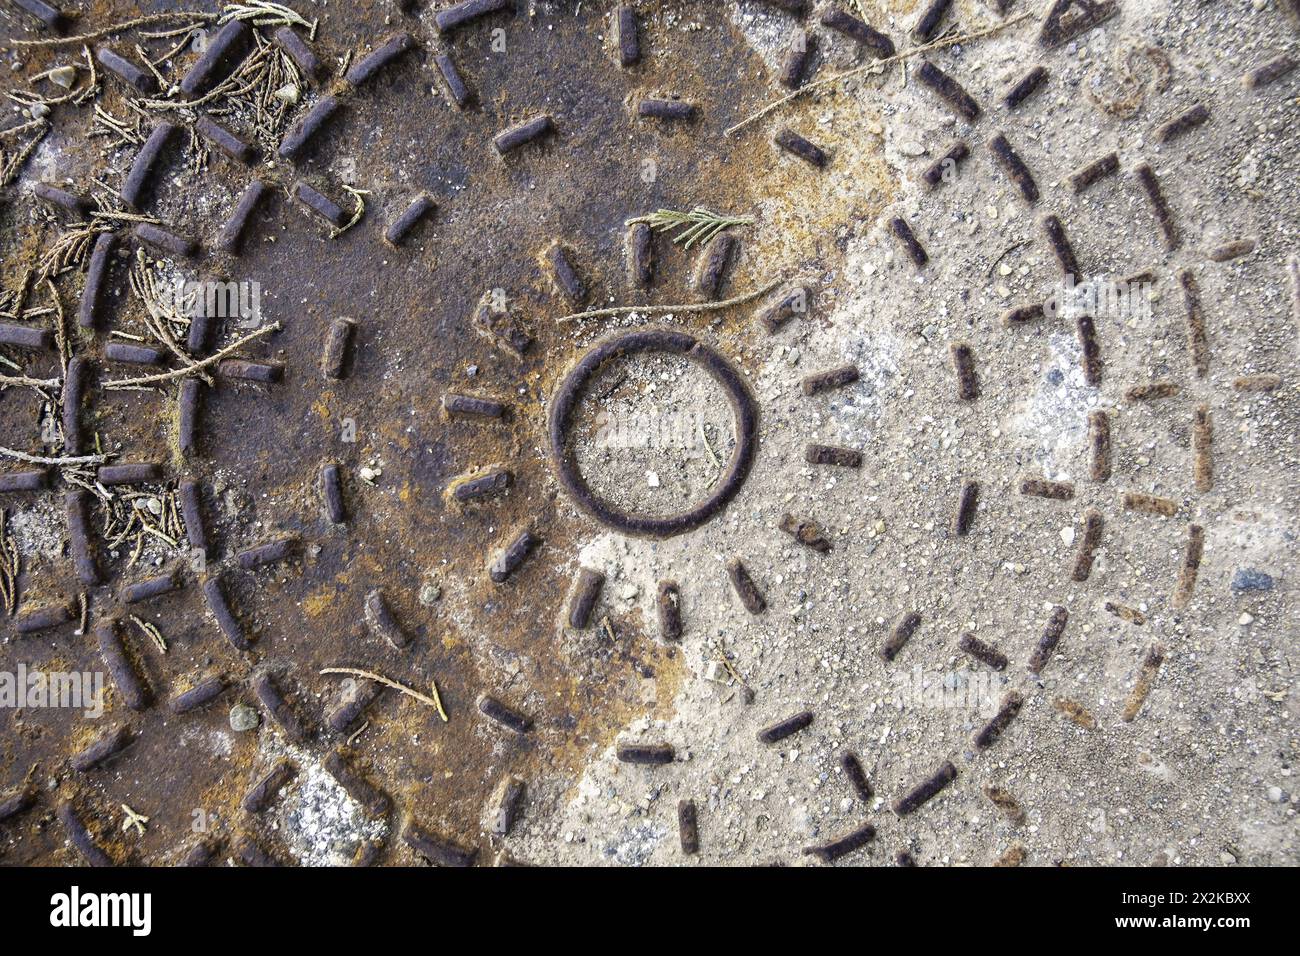 Detail of old metal manhole cover Stock Photo